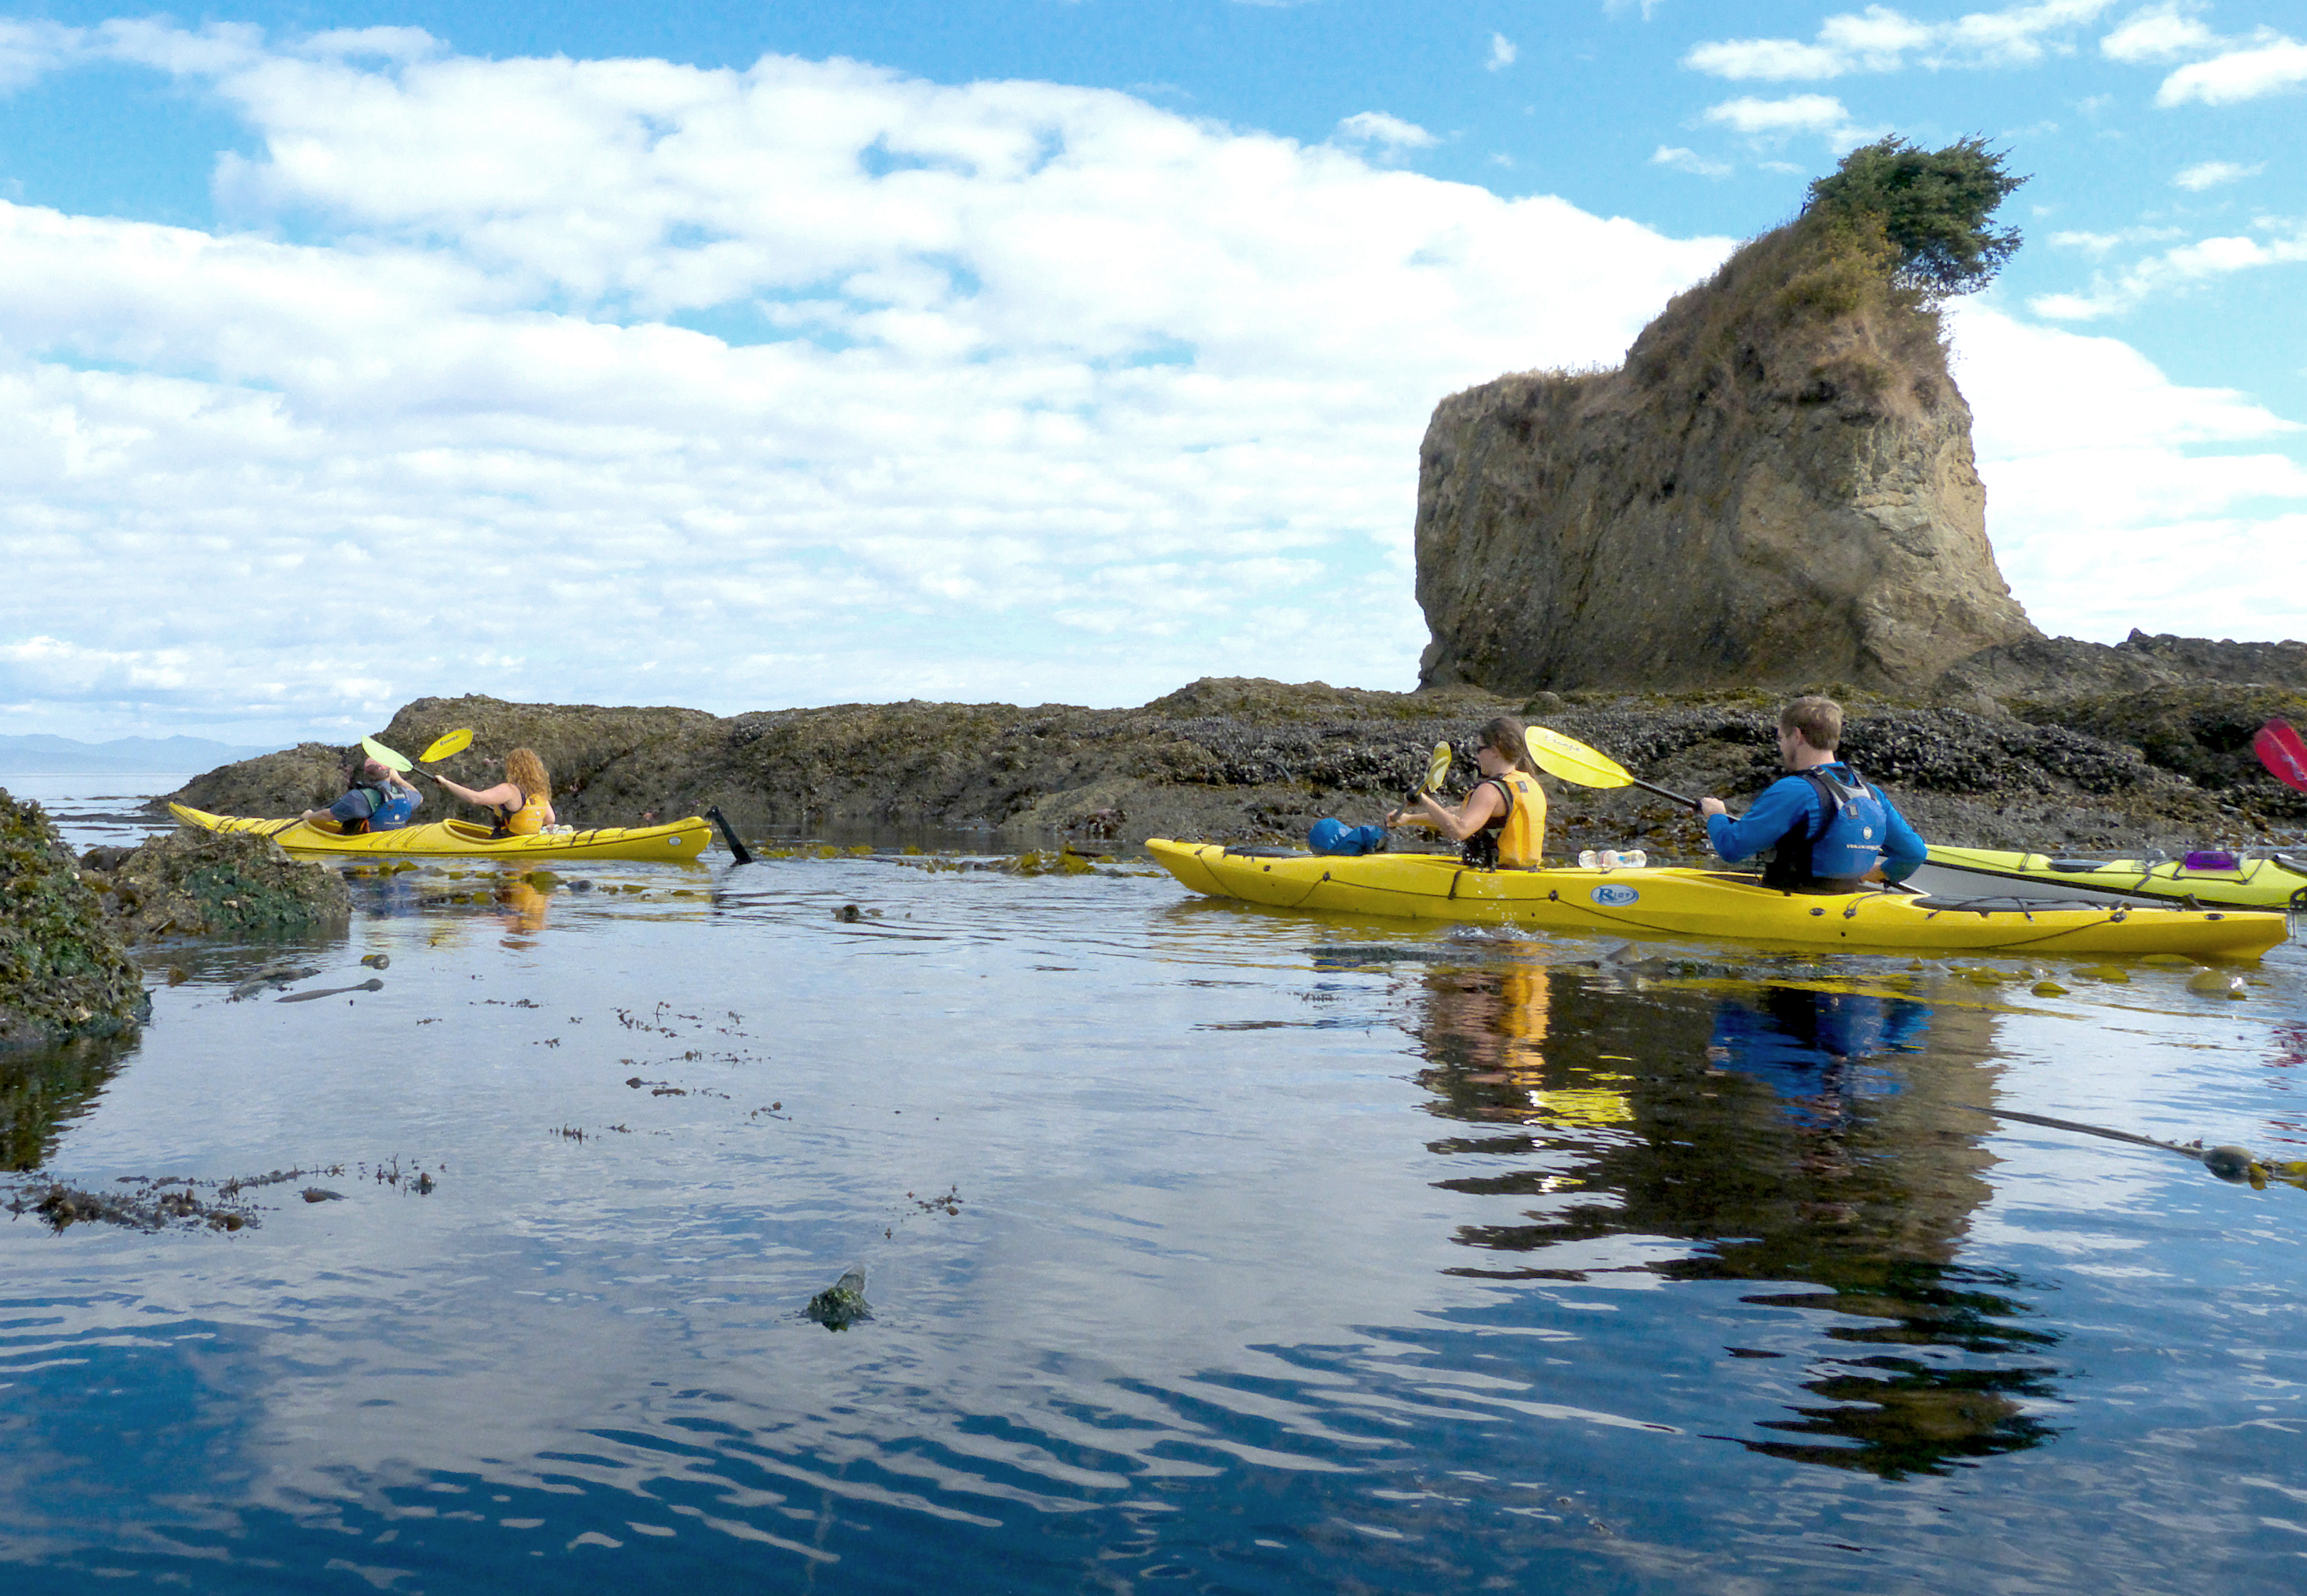 The third annual Port Angeles Kayak and Film Festival begins today with a film screening of videos captured by kayakers